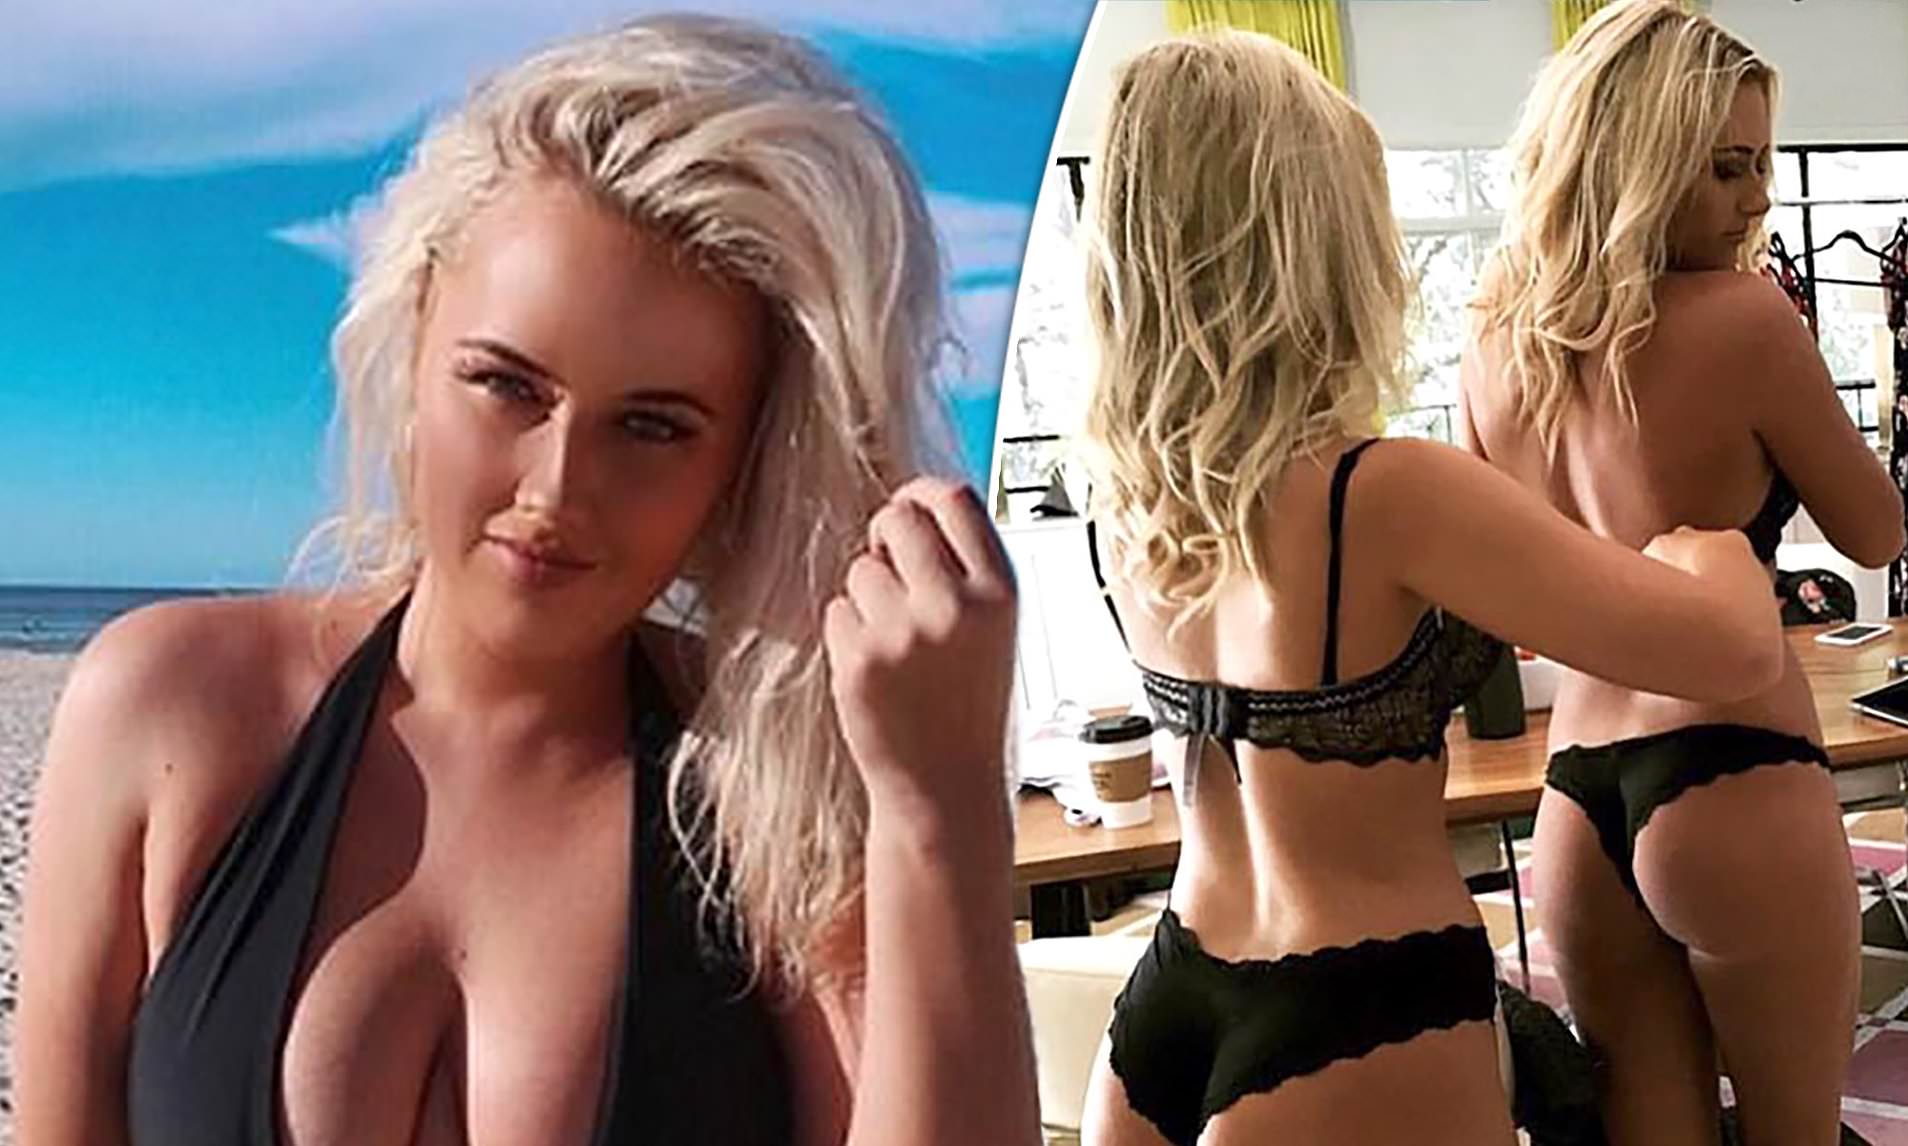 Former pro surfer Ellie-Jean Coffey defends decision to sell nudes online D...